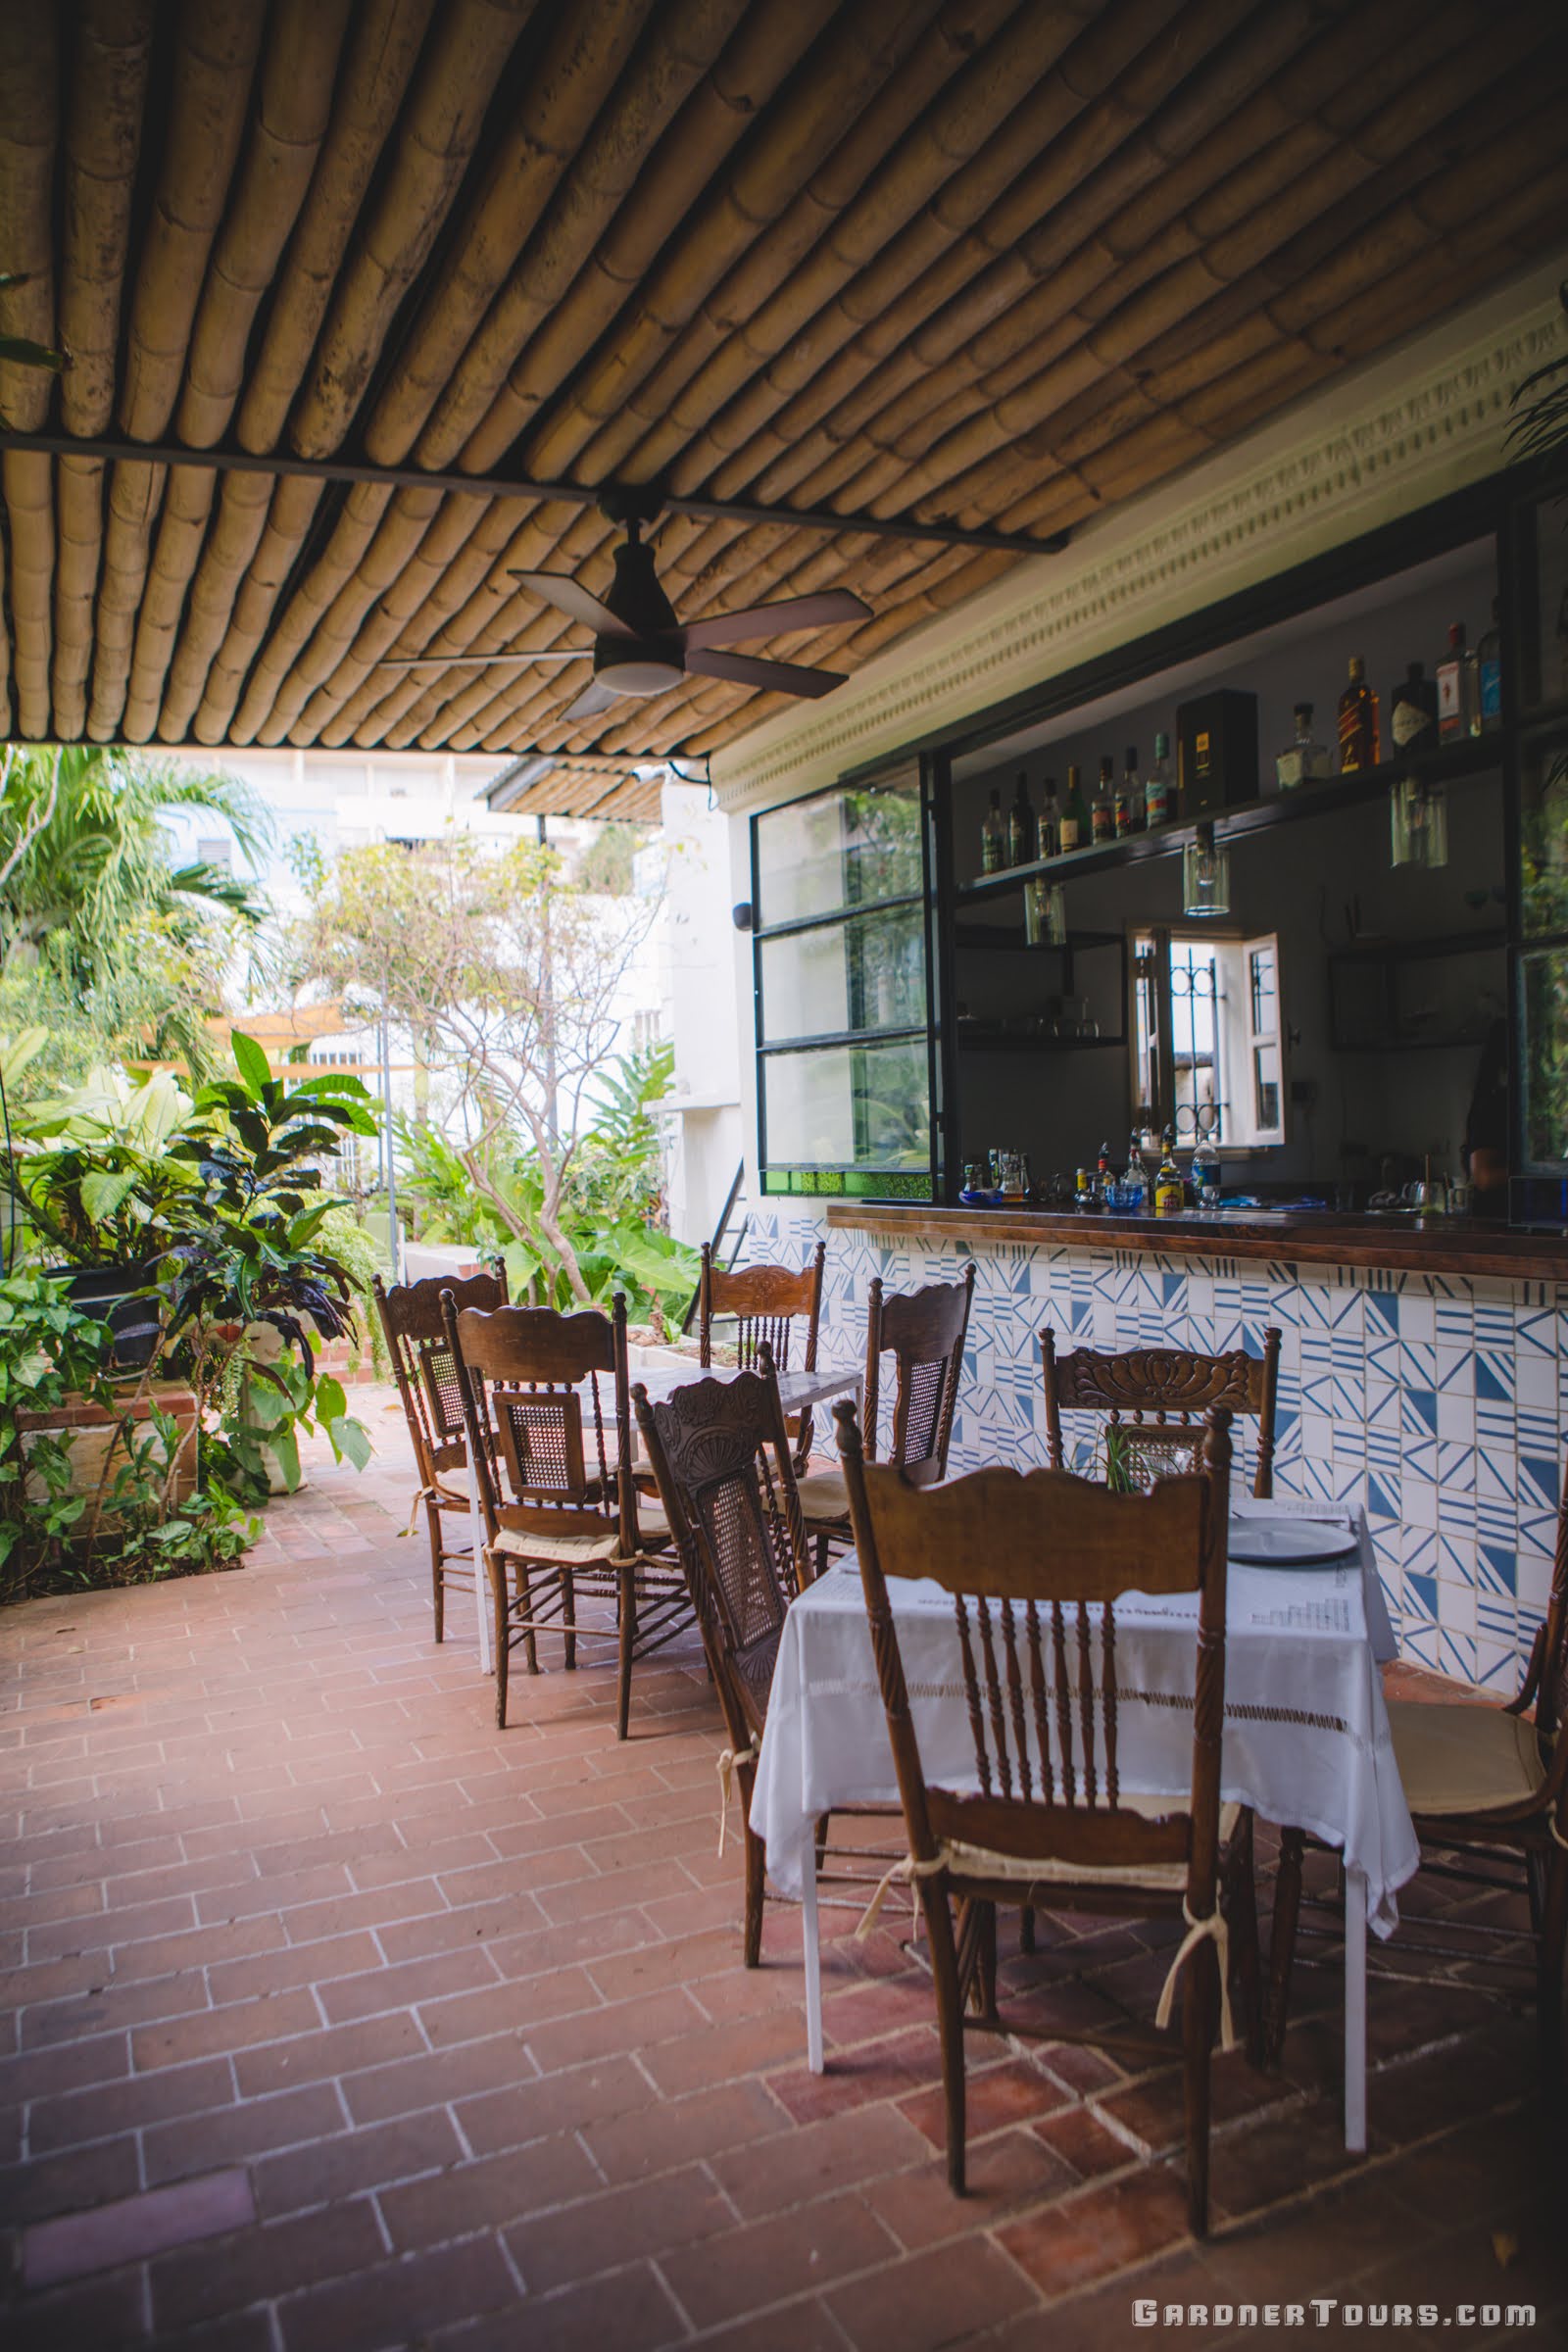 Relaxing Patio with Classic Chairs and Bar at 5-Star Restaurant Paladar La Bodega in Vedado, Havana, Cuba